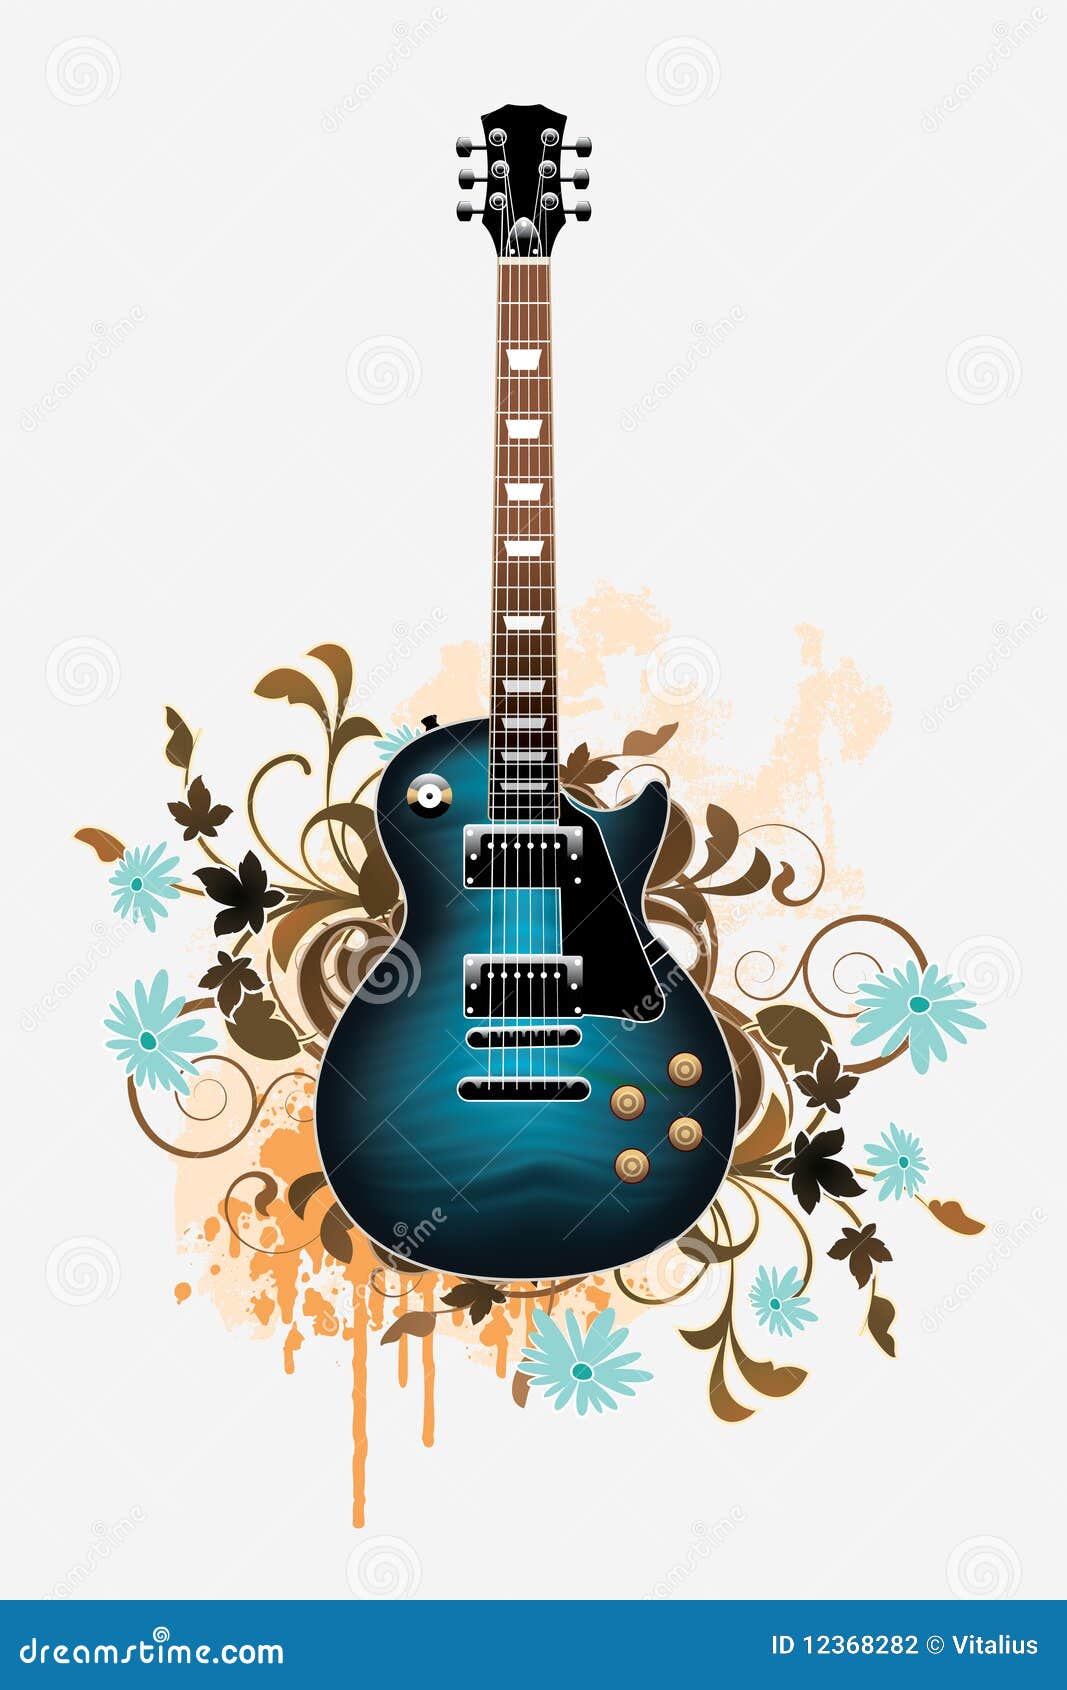 Electric Guitar With Design Elements Stock Photography - Image ...